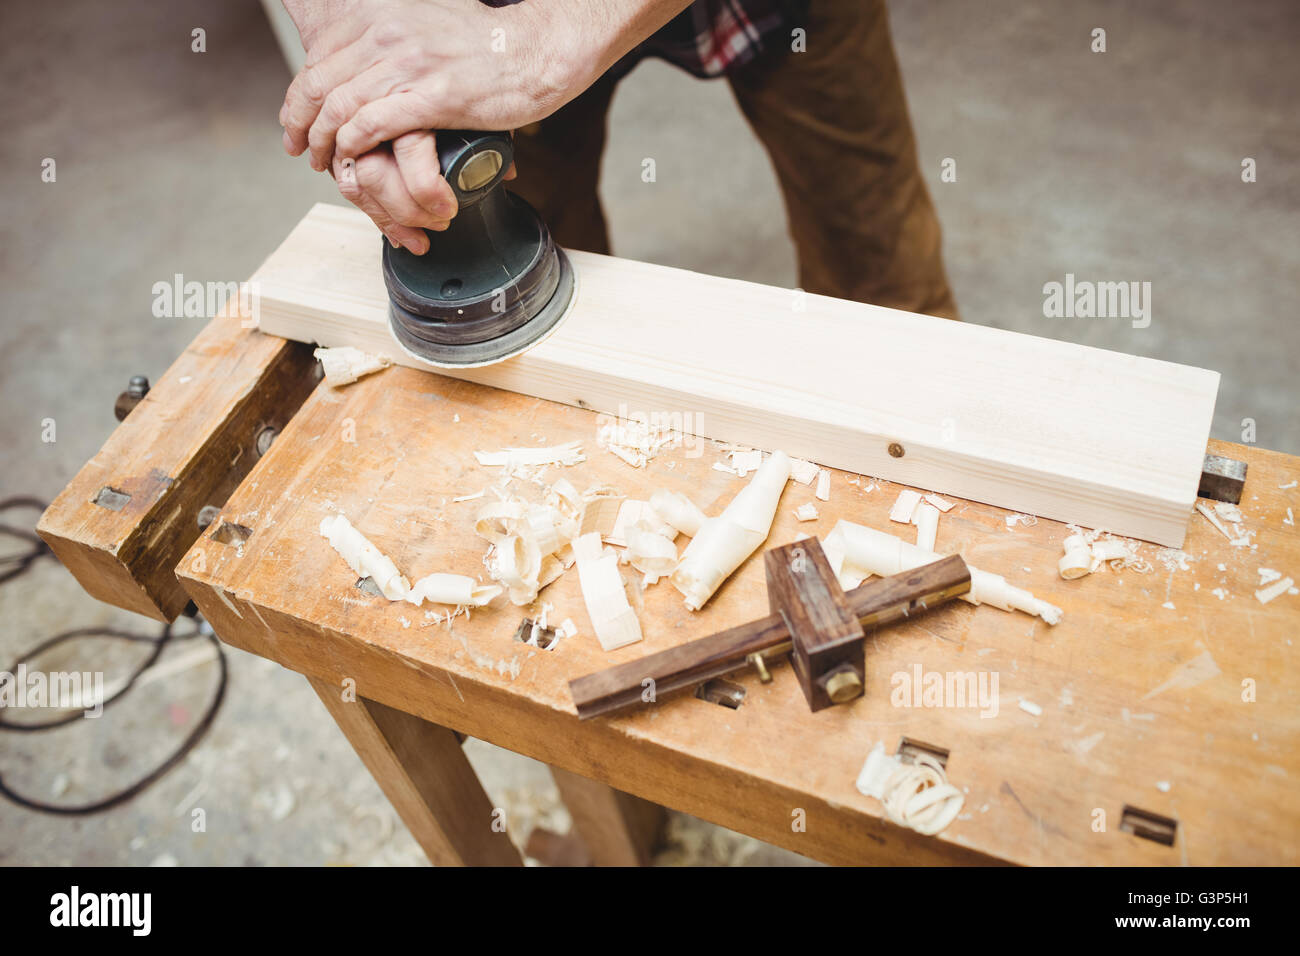 Carpenter sanding down a plank of wood Stock Photo